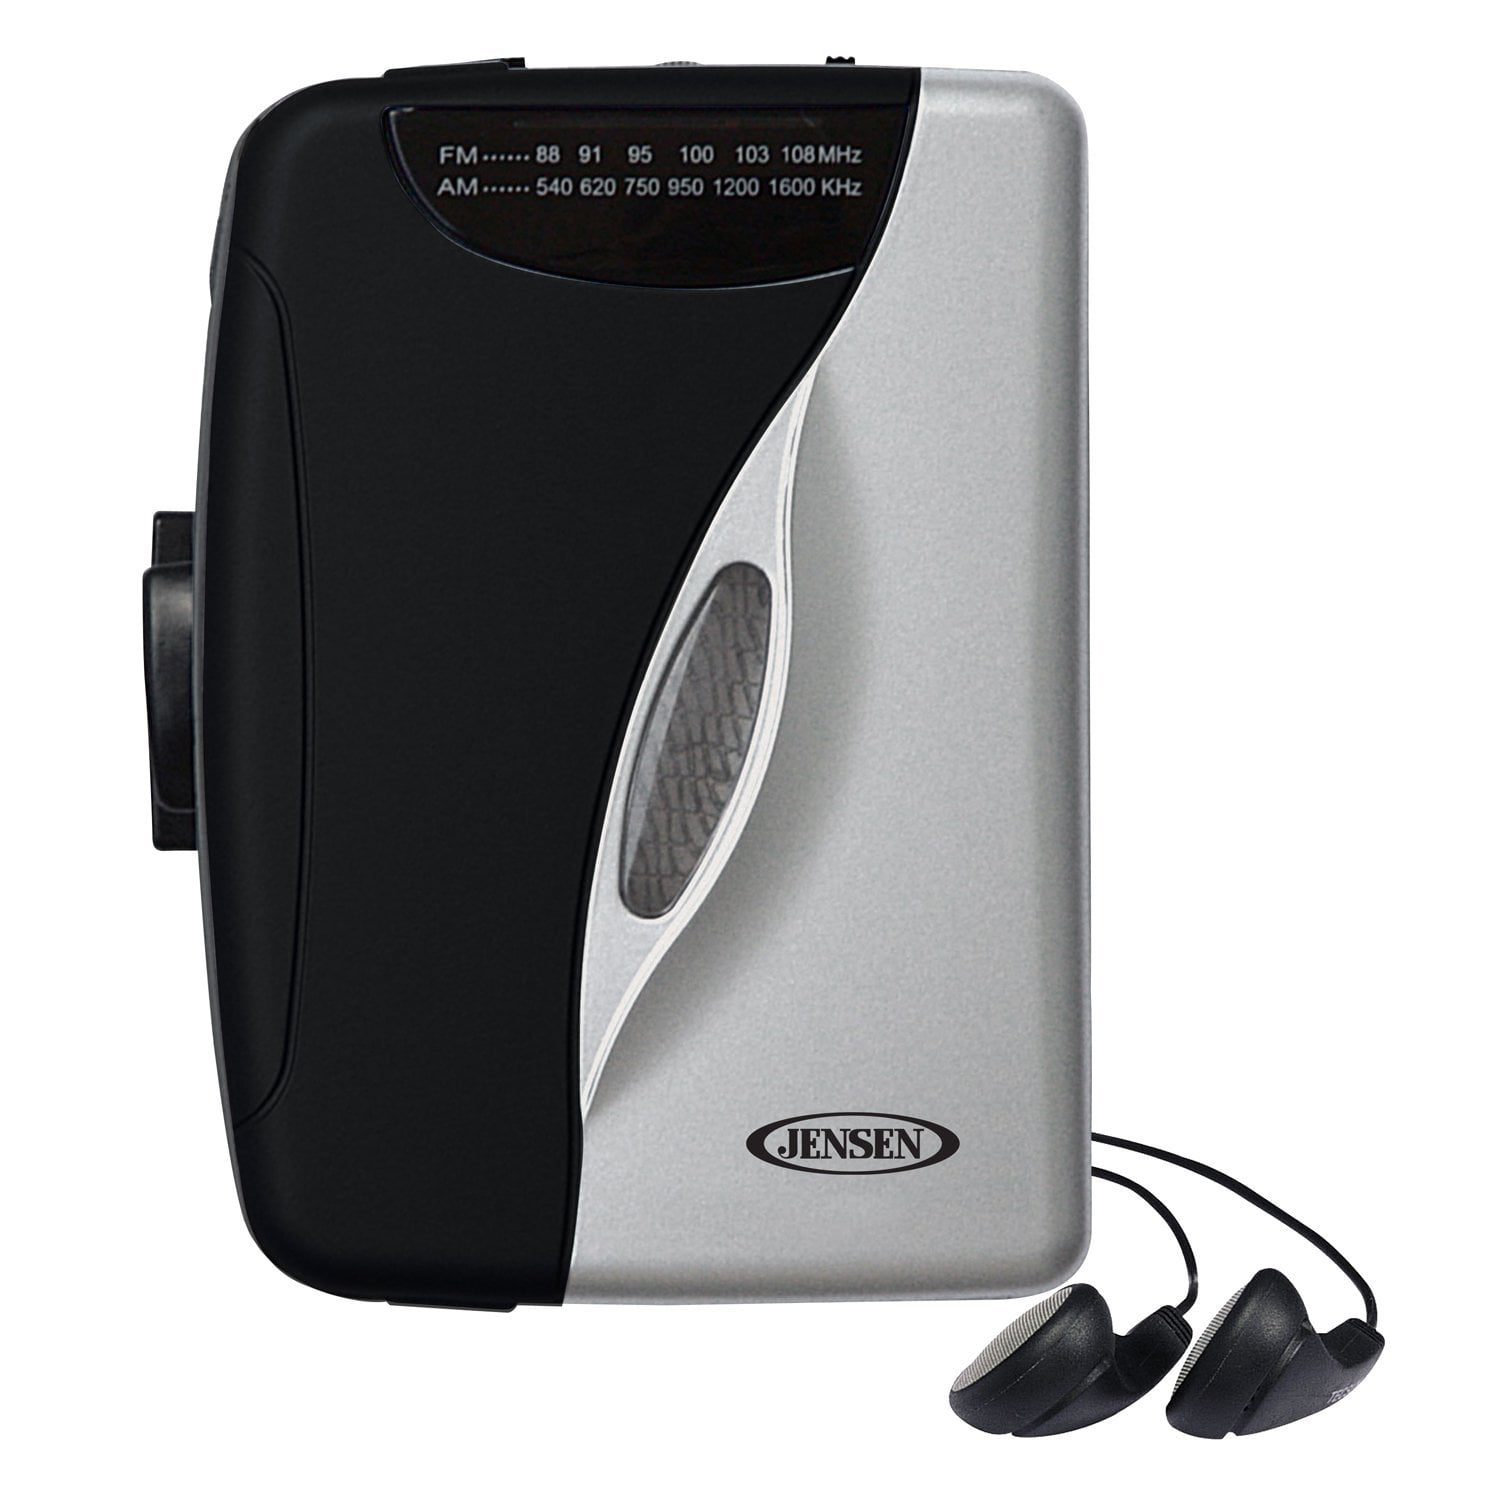 Jensen MR-50 AM//FM Portable Pocket Radio with Earbuds and Volume Control